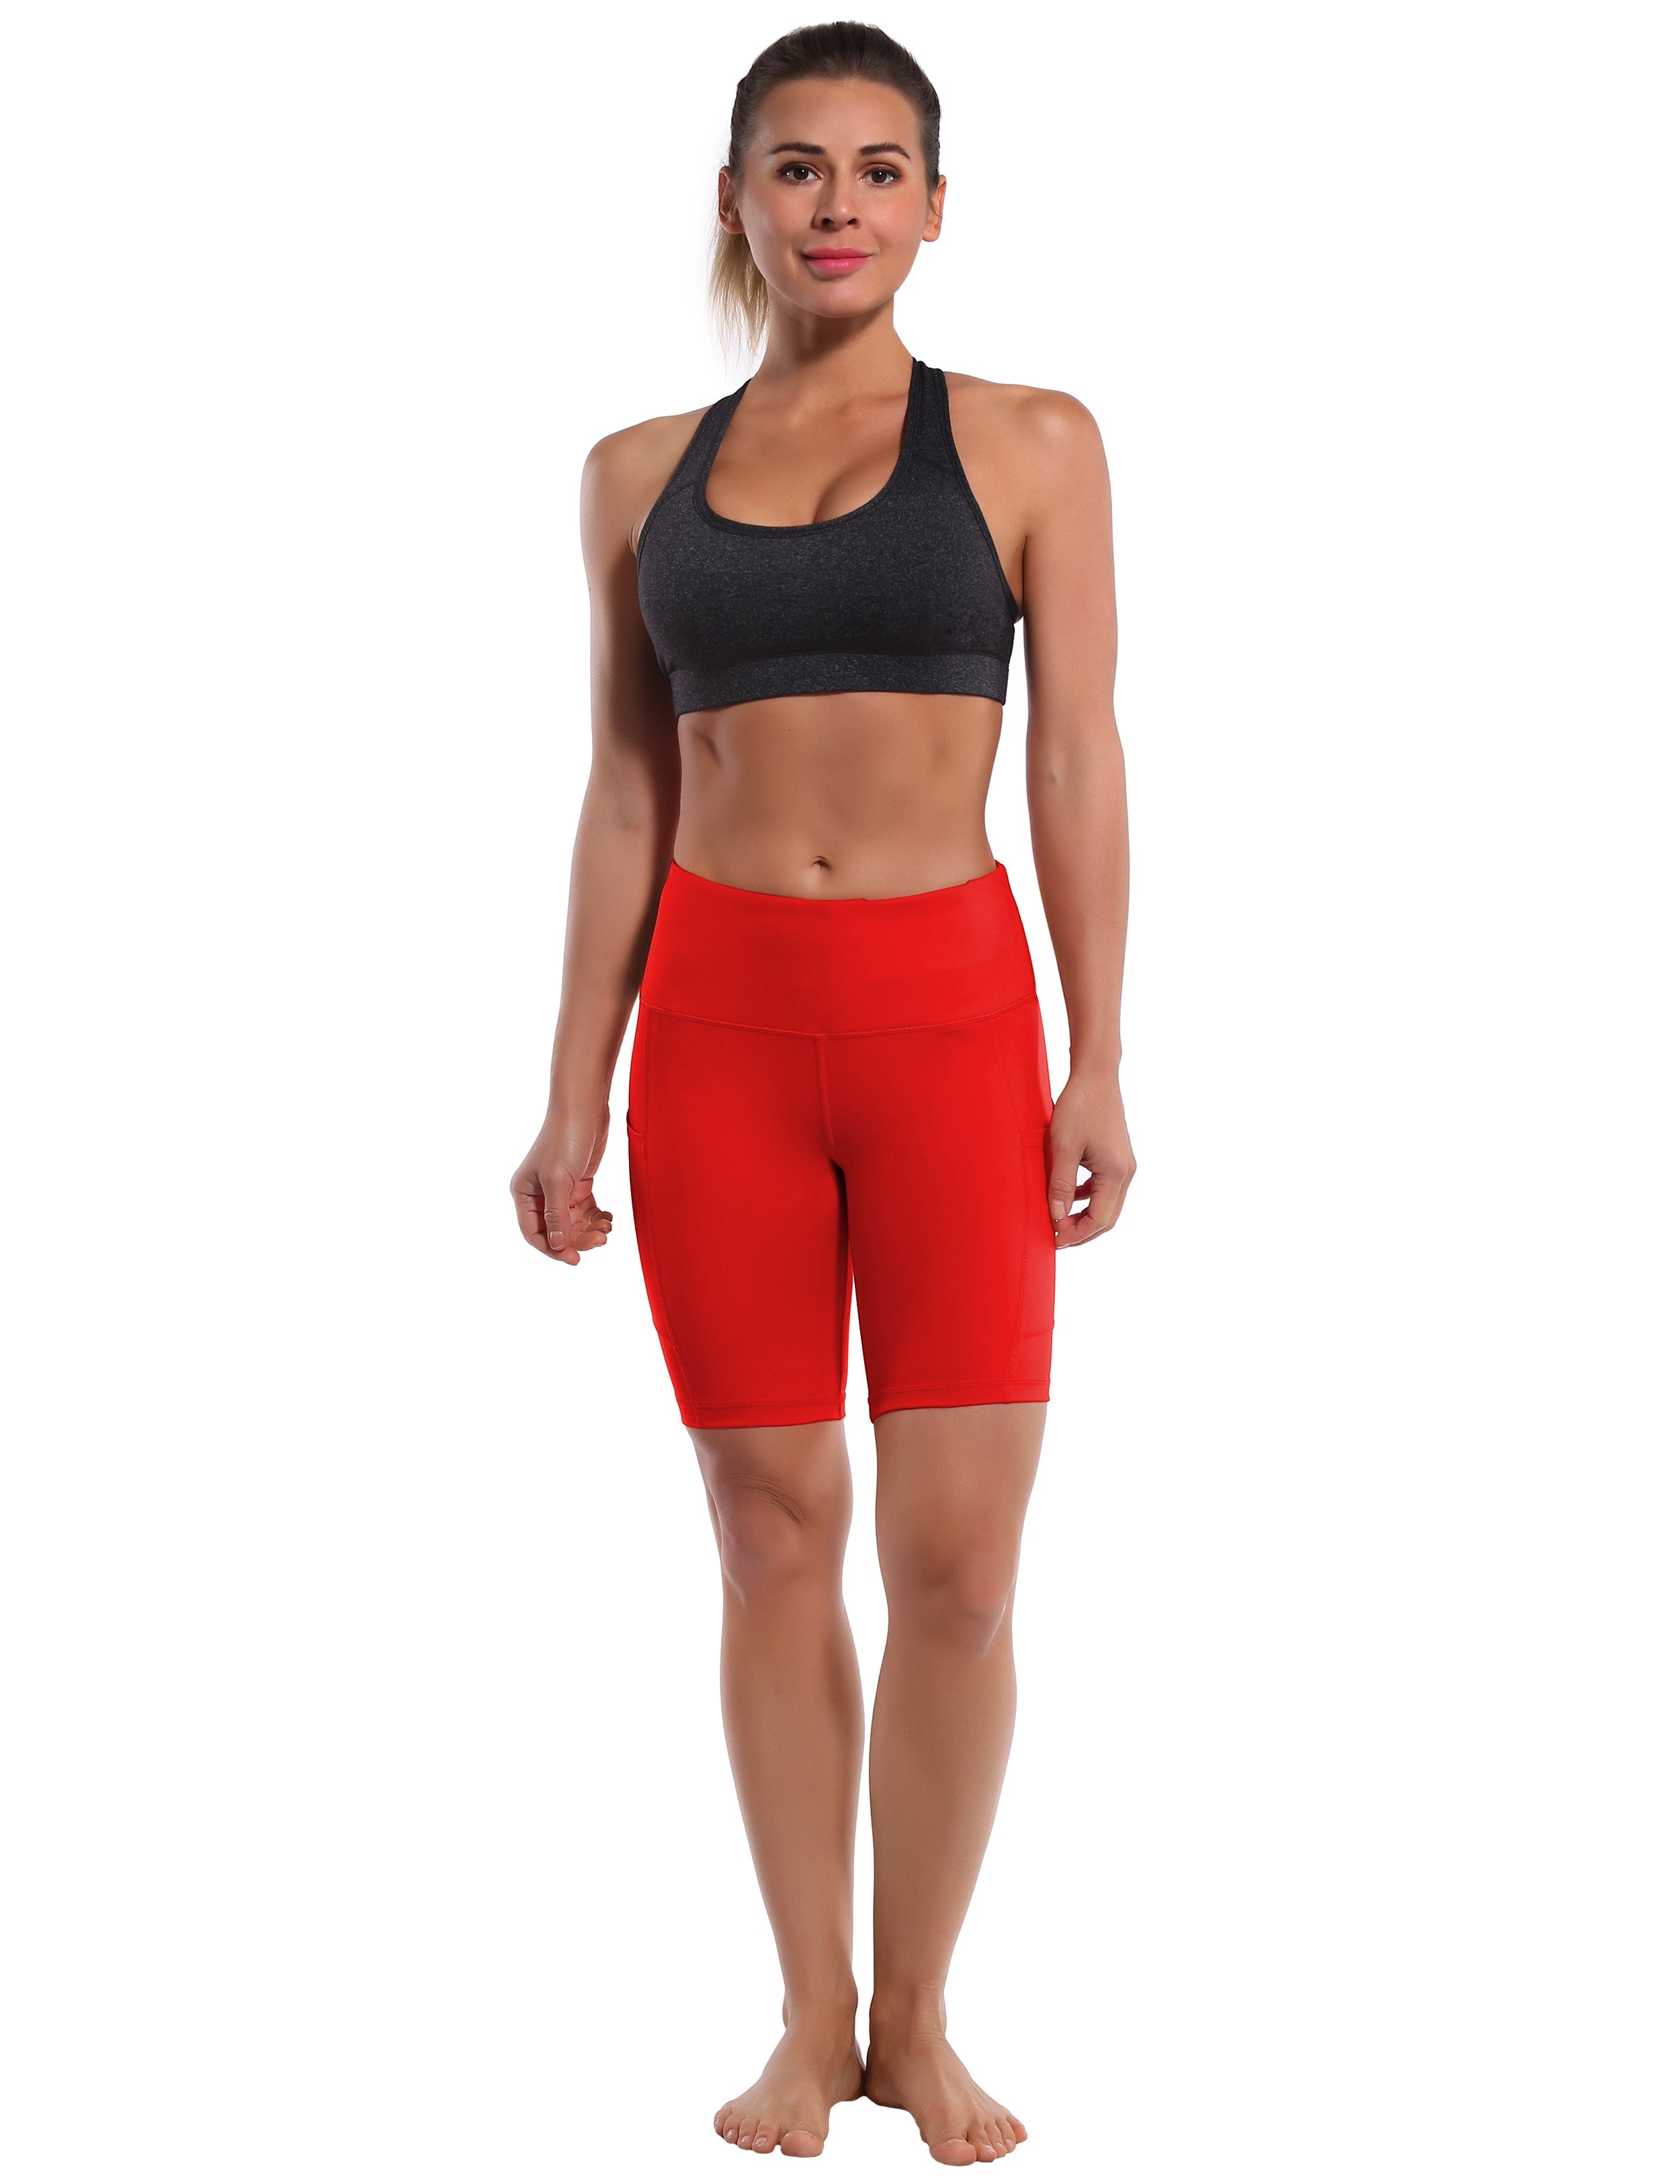 8" Side Pockets Biking Shorts scarlet Sleek, soft, smooth and totally comfortable: our newest style is here. Softest-ever fabric High elasticity High density 4-way stretch Fabric doesn't attract lint easily No see-through Moisture-wicking Machine wash 75% Nylon, 25% Spandex